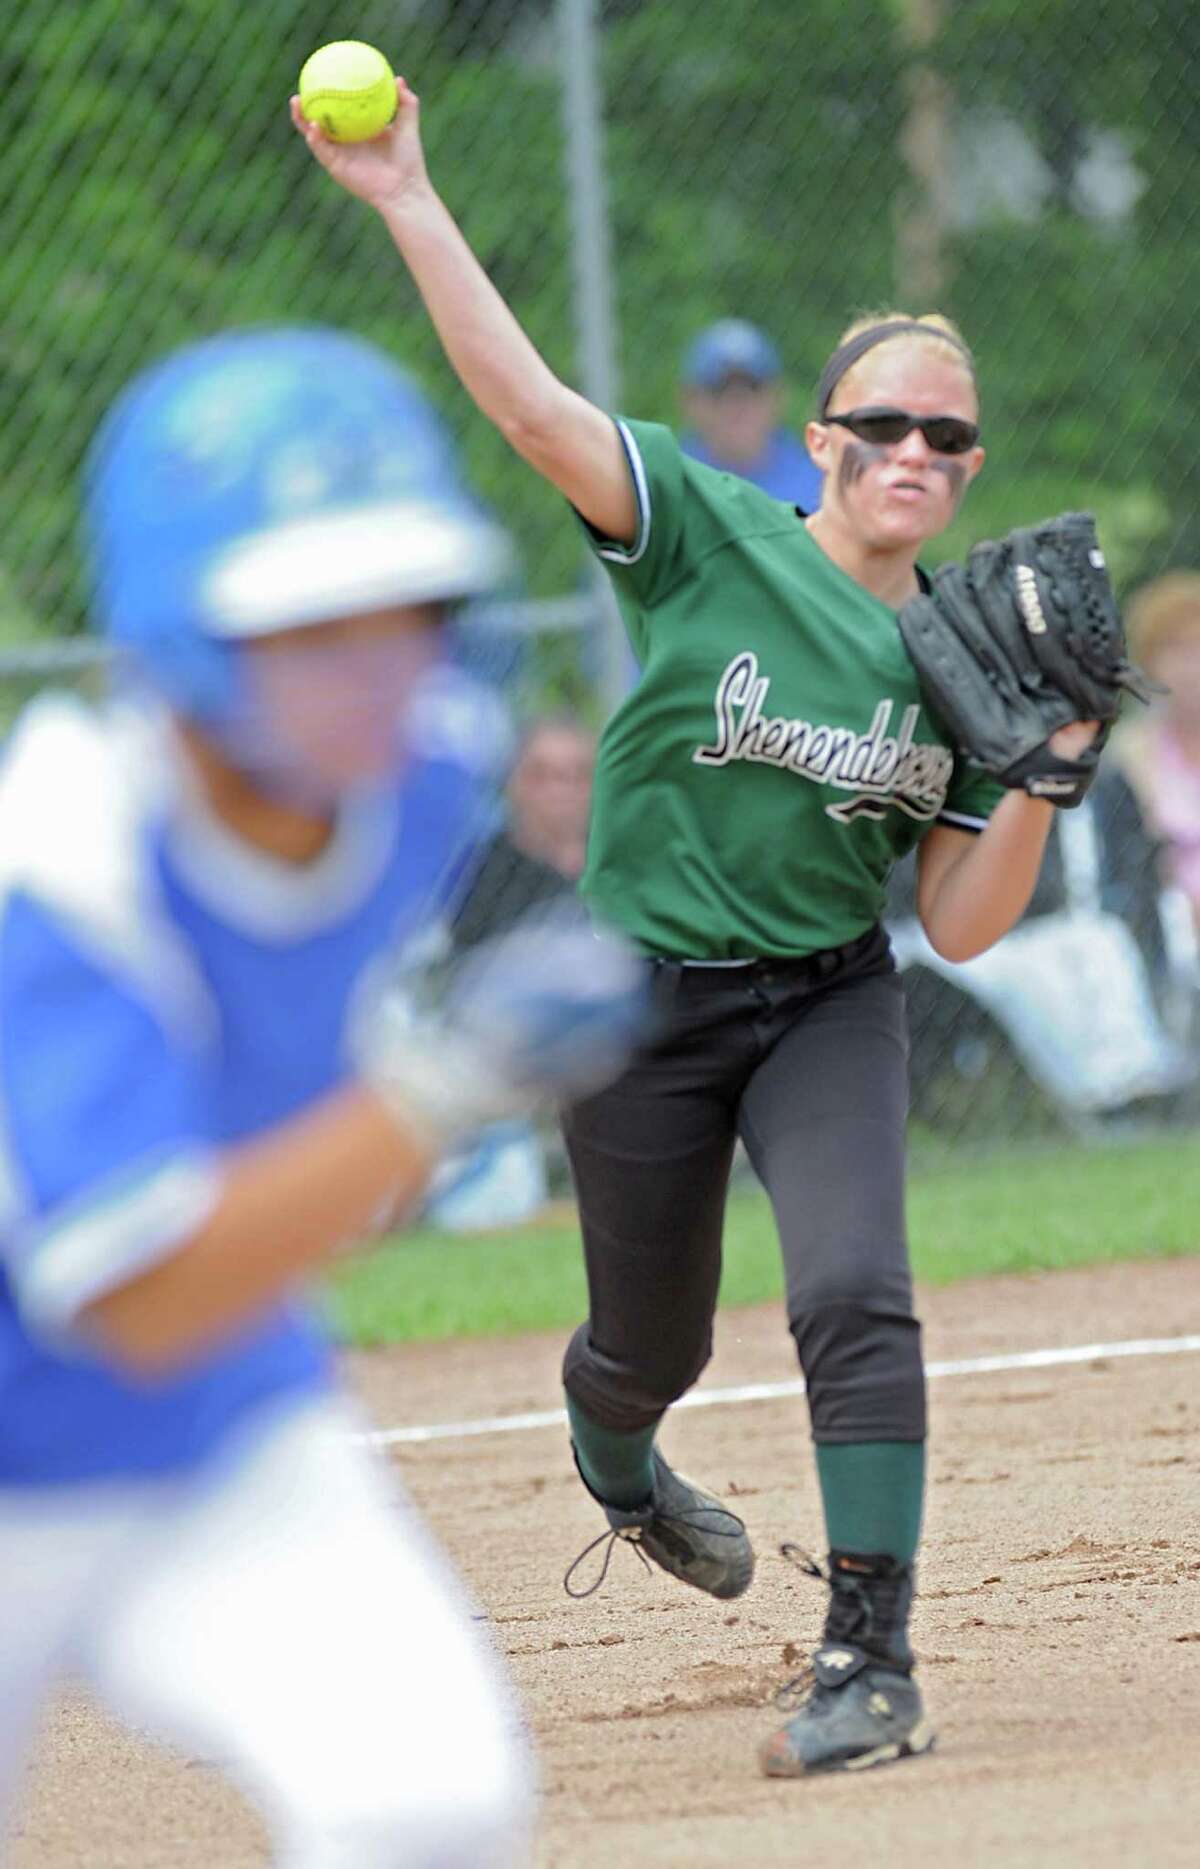 Shenendehowa pitcher Erika Daigle throws a grounder to first base during a state Class AA regional softball game against Cicero-North Syracuse June 5, 2012 in Colonie, N.Y. (Lori Van Buren / Times Union)